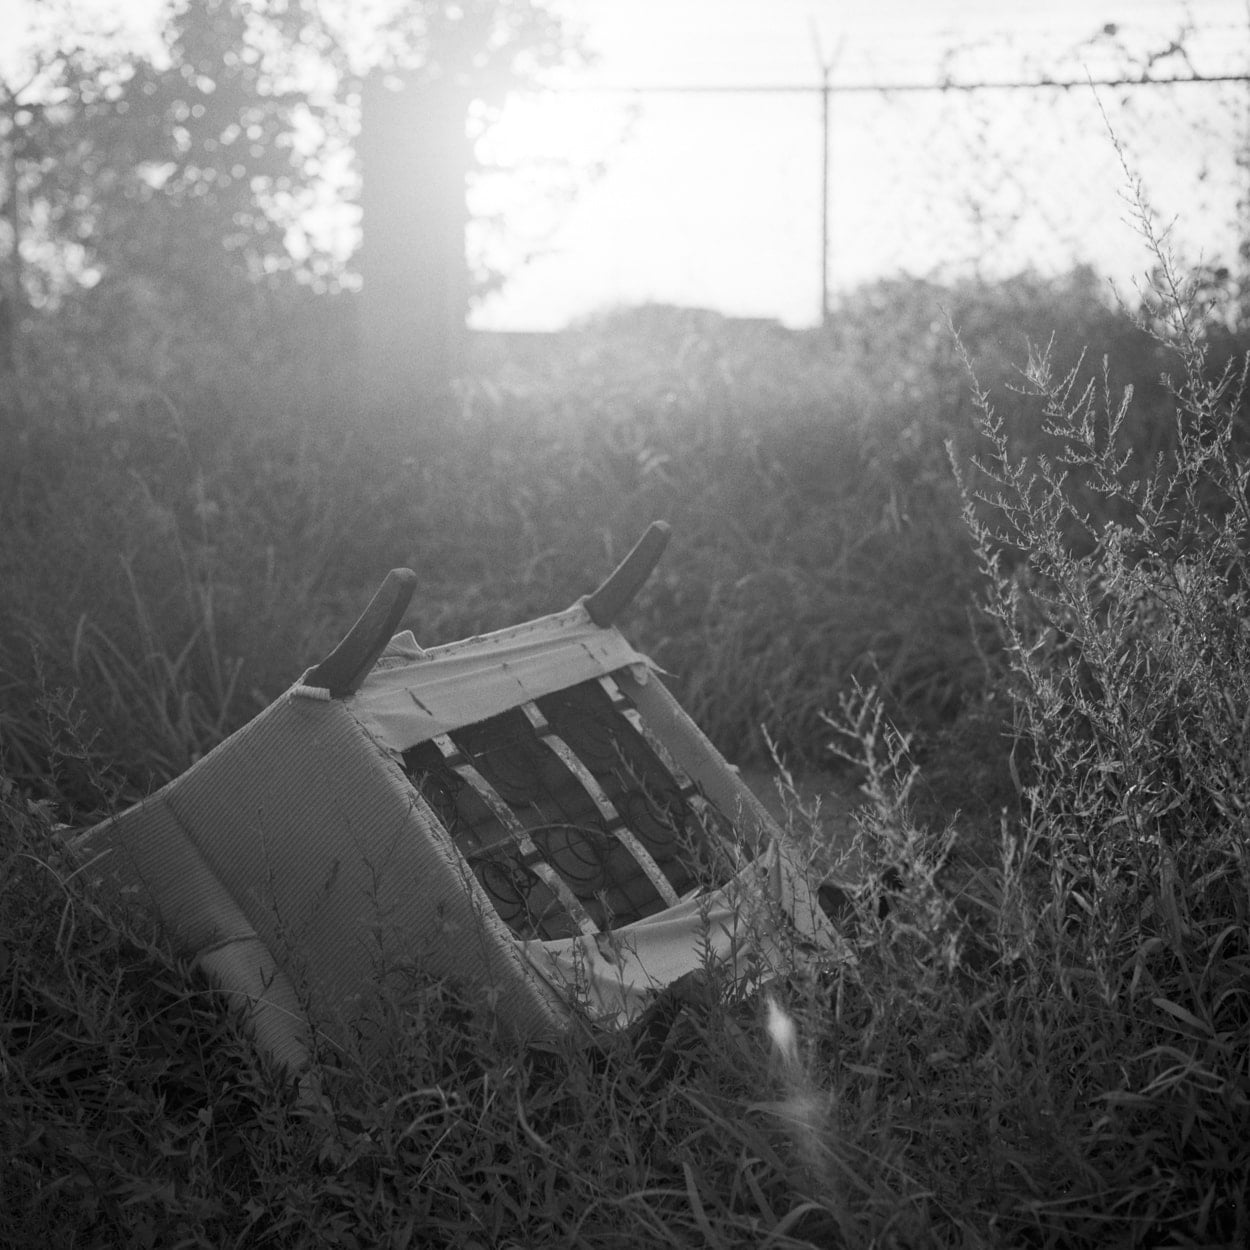 A discard chair in grass on the side of the road